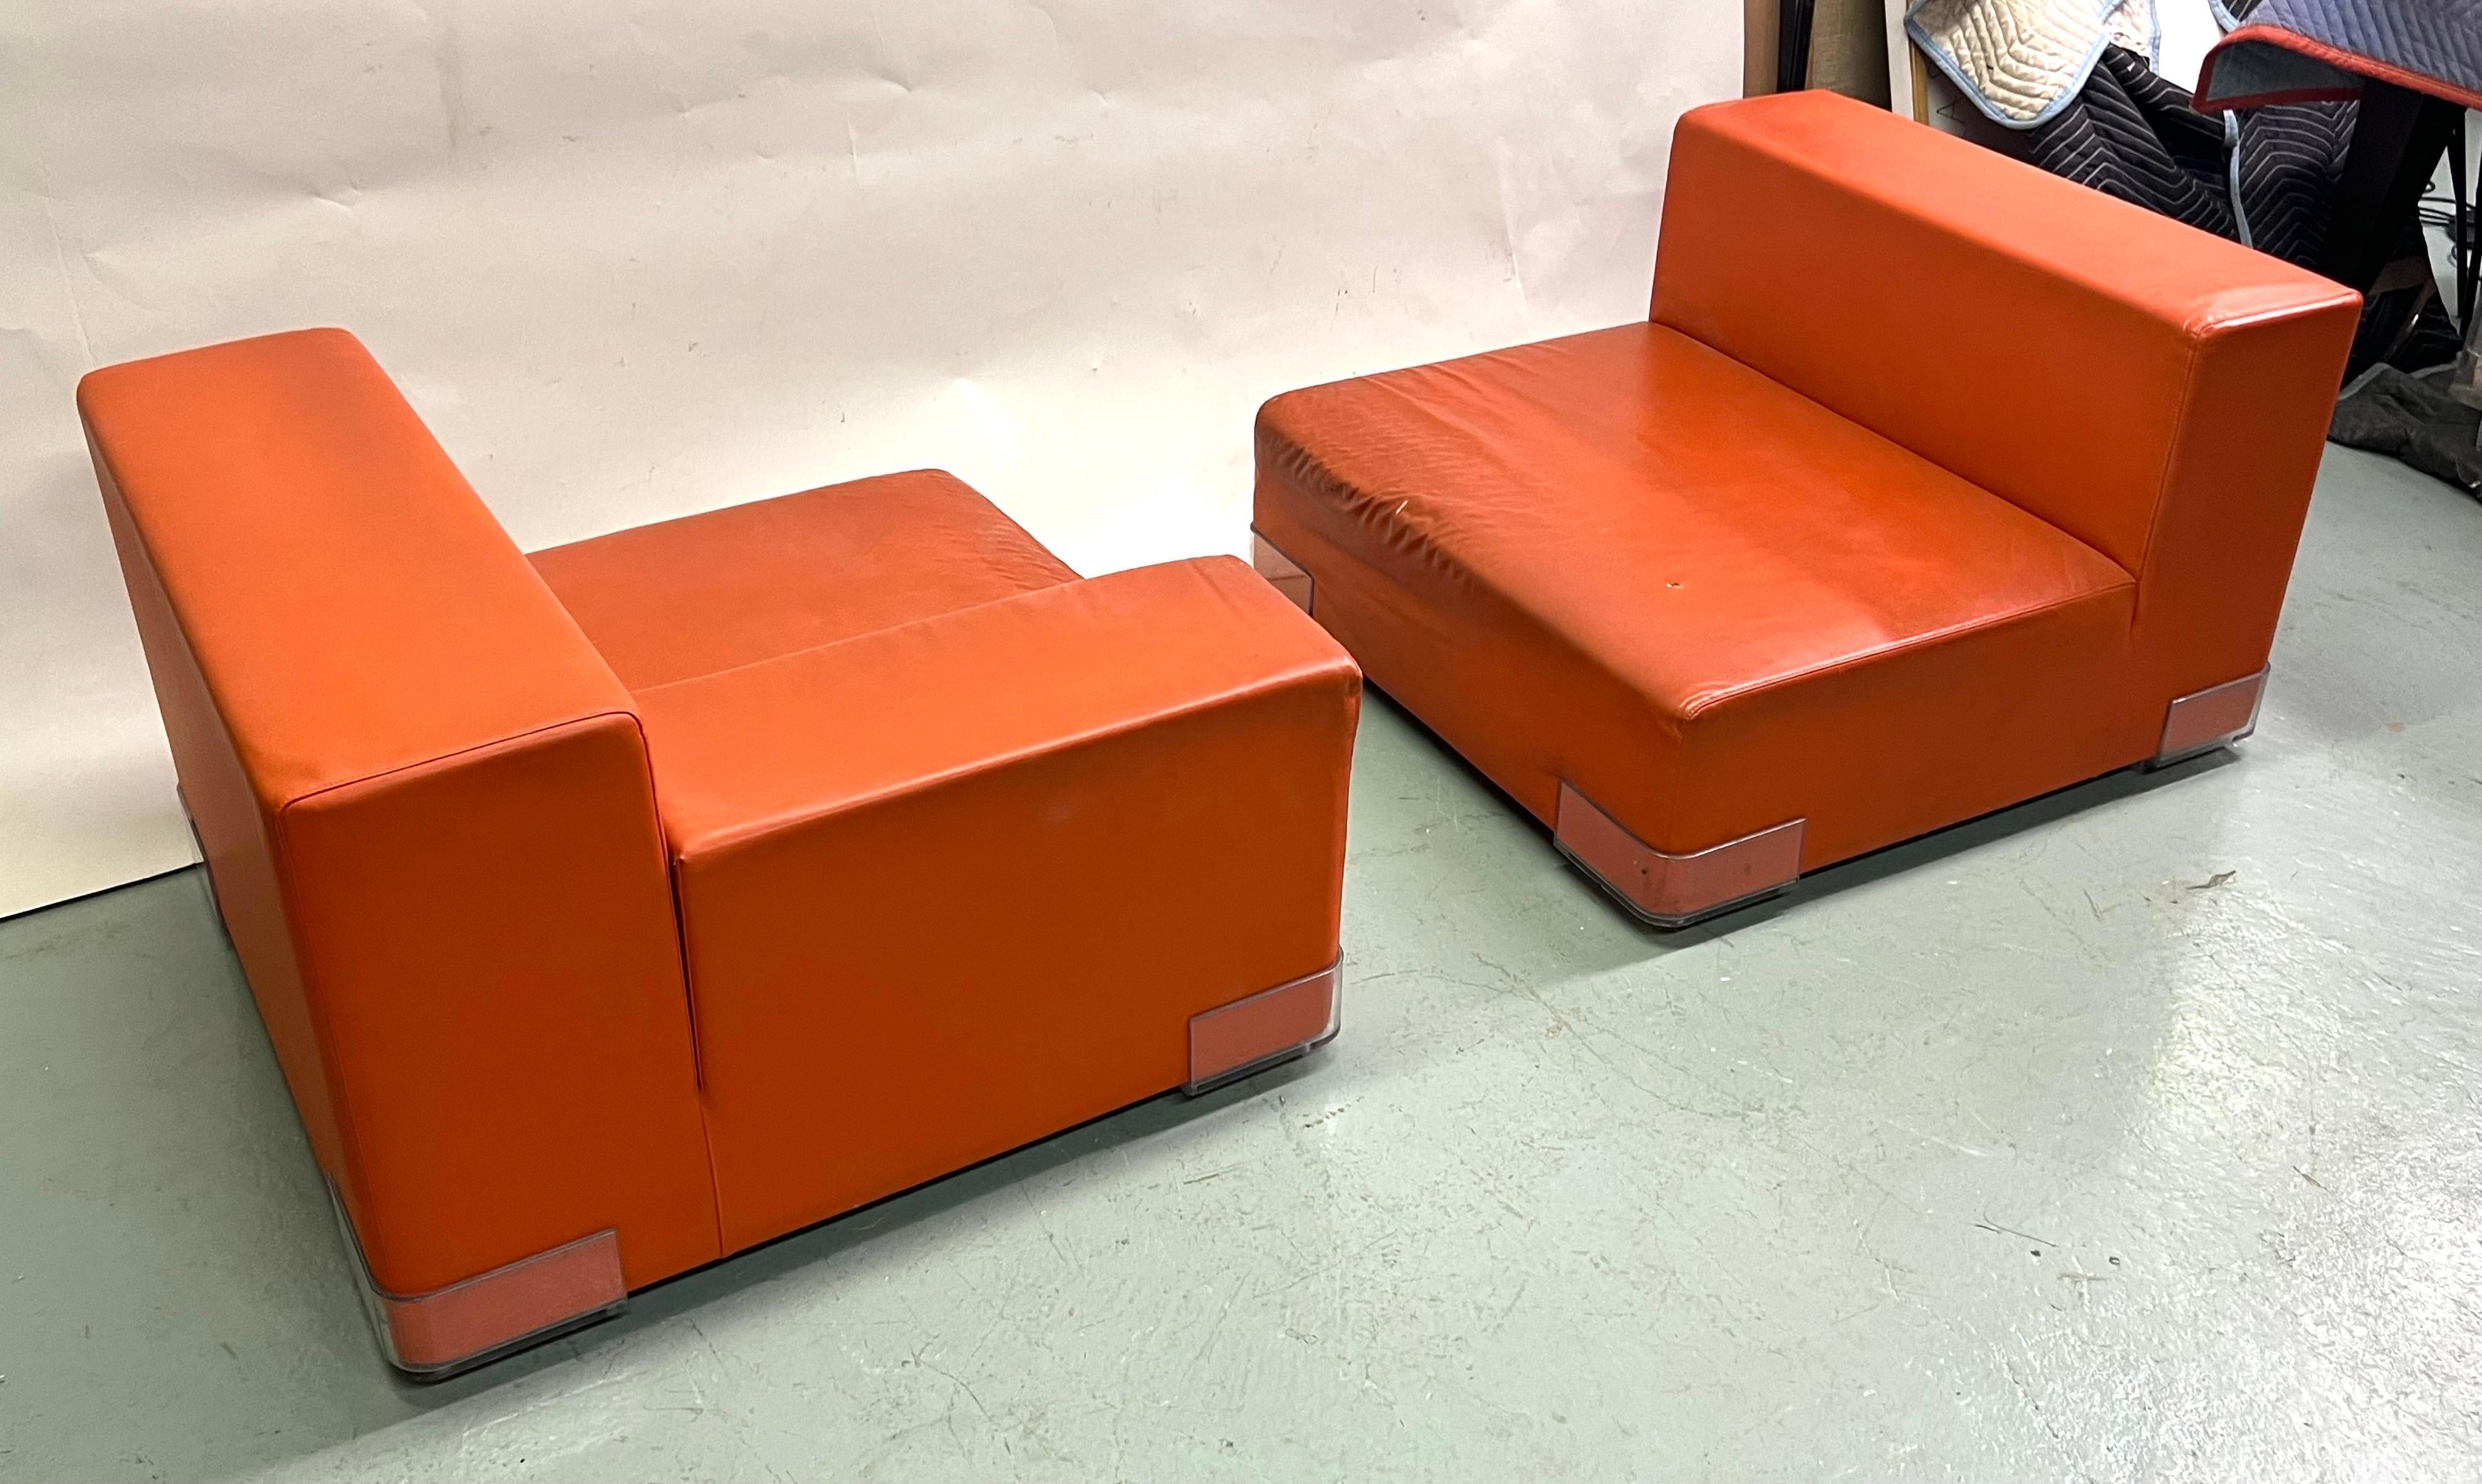 An Iconic Italian Mid-Century Pair of Lounge Chairs by Piero Lissoni in a sleek, contemporary, low, square form circa 1970-1975. The pieces are modular, multi-functional and will form a sofa / settee. It is decorated in a bright orange rubberized